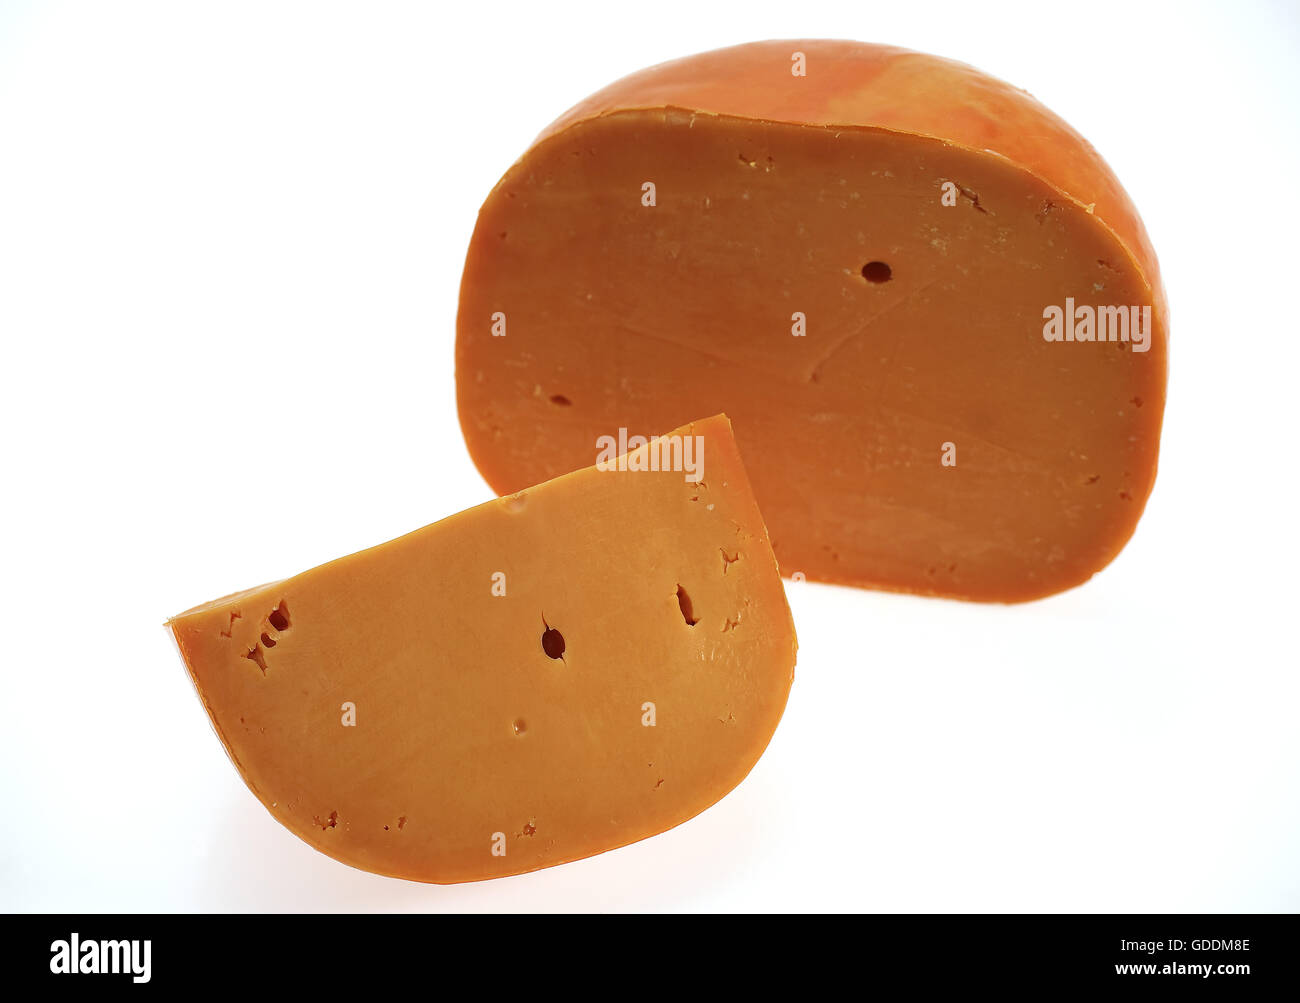 French Cheese called Mimolette, Cheese made with Cow's Milk Stock Photo